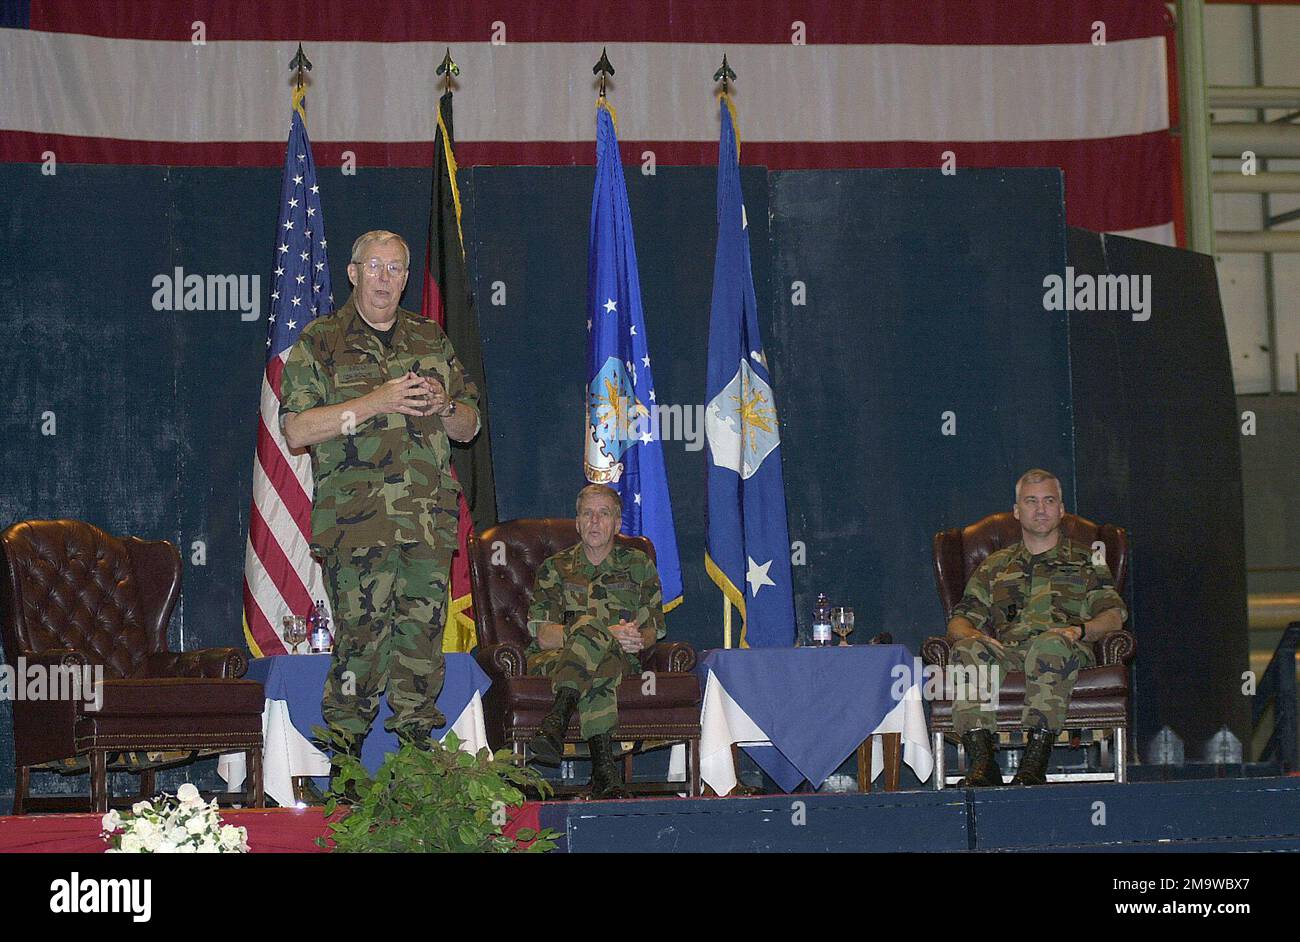 US Secretary of the Air Force (SECAF) Dr. James G. Roche (left), accompanied by US Air Force (USAF) General (GEN) Robert H. (Doc) Foglesong, US Air Forces in Europe (USAFE) Commander, and Brigadier General (BGEN) Erwin F. Lessel. III (right), Commander, 86th Airlift Wing (AW), speaks to Airmen during his visit to Ramstein Air Base (AB), Germany. US Secretary of the Air Force (SECAF) Dr. James G. Roche (left), accompanied by US Air Force (USAF) General (GEN) Robert H. (Doc) Foglesong, US Air Forces in Europe (USAFE) Commander, and Brigadier General (BGEN) Erwin F. Lessel. III (right), Commander Stock Photo